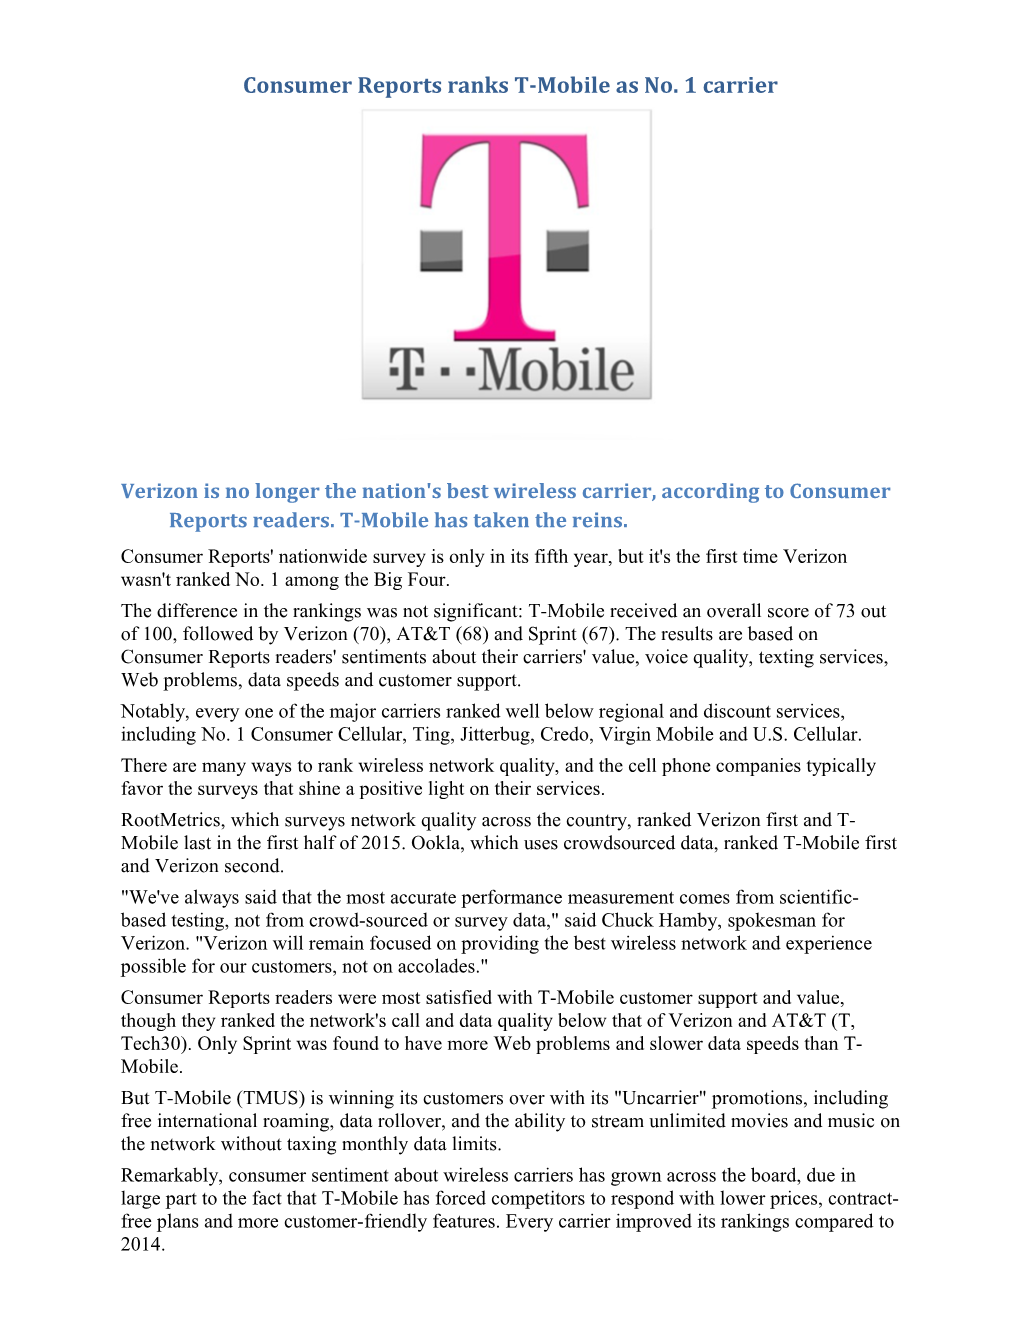 Consumer Reports Ranks T-Mobile As No. 1 Carrier